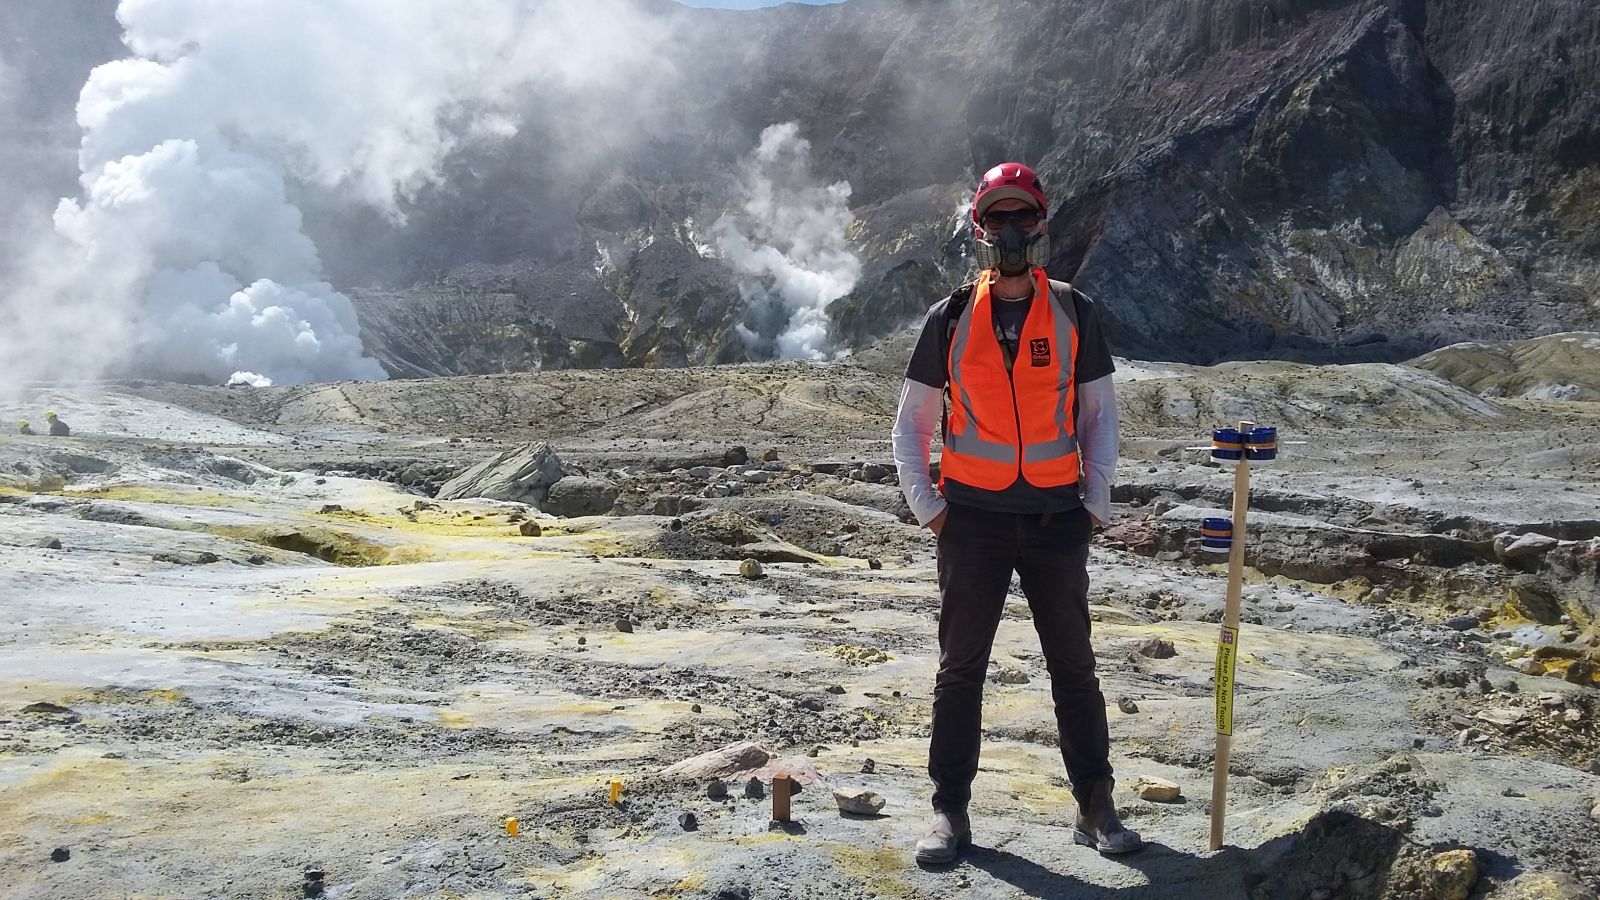 David McLagan stands on the volcanic Whakaari (White Island) in New Zealand. He was there measuring Mercury emissions from volcanic sources.